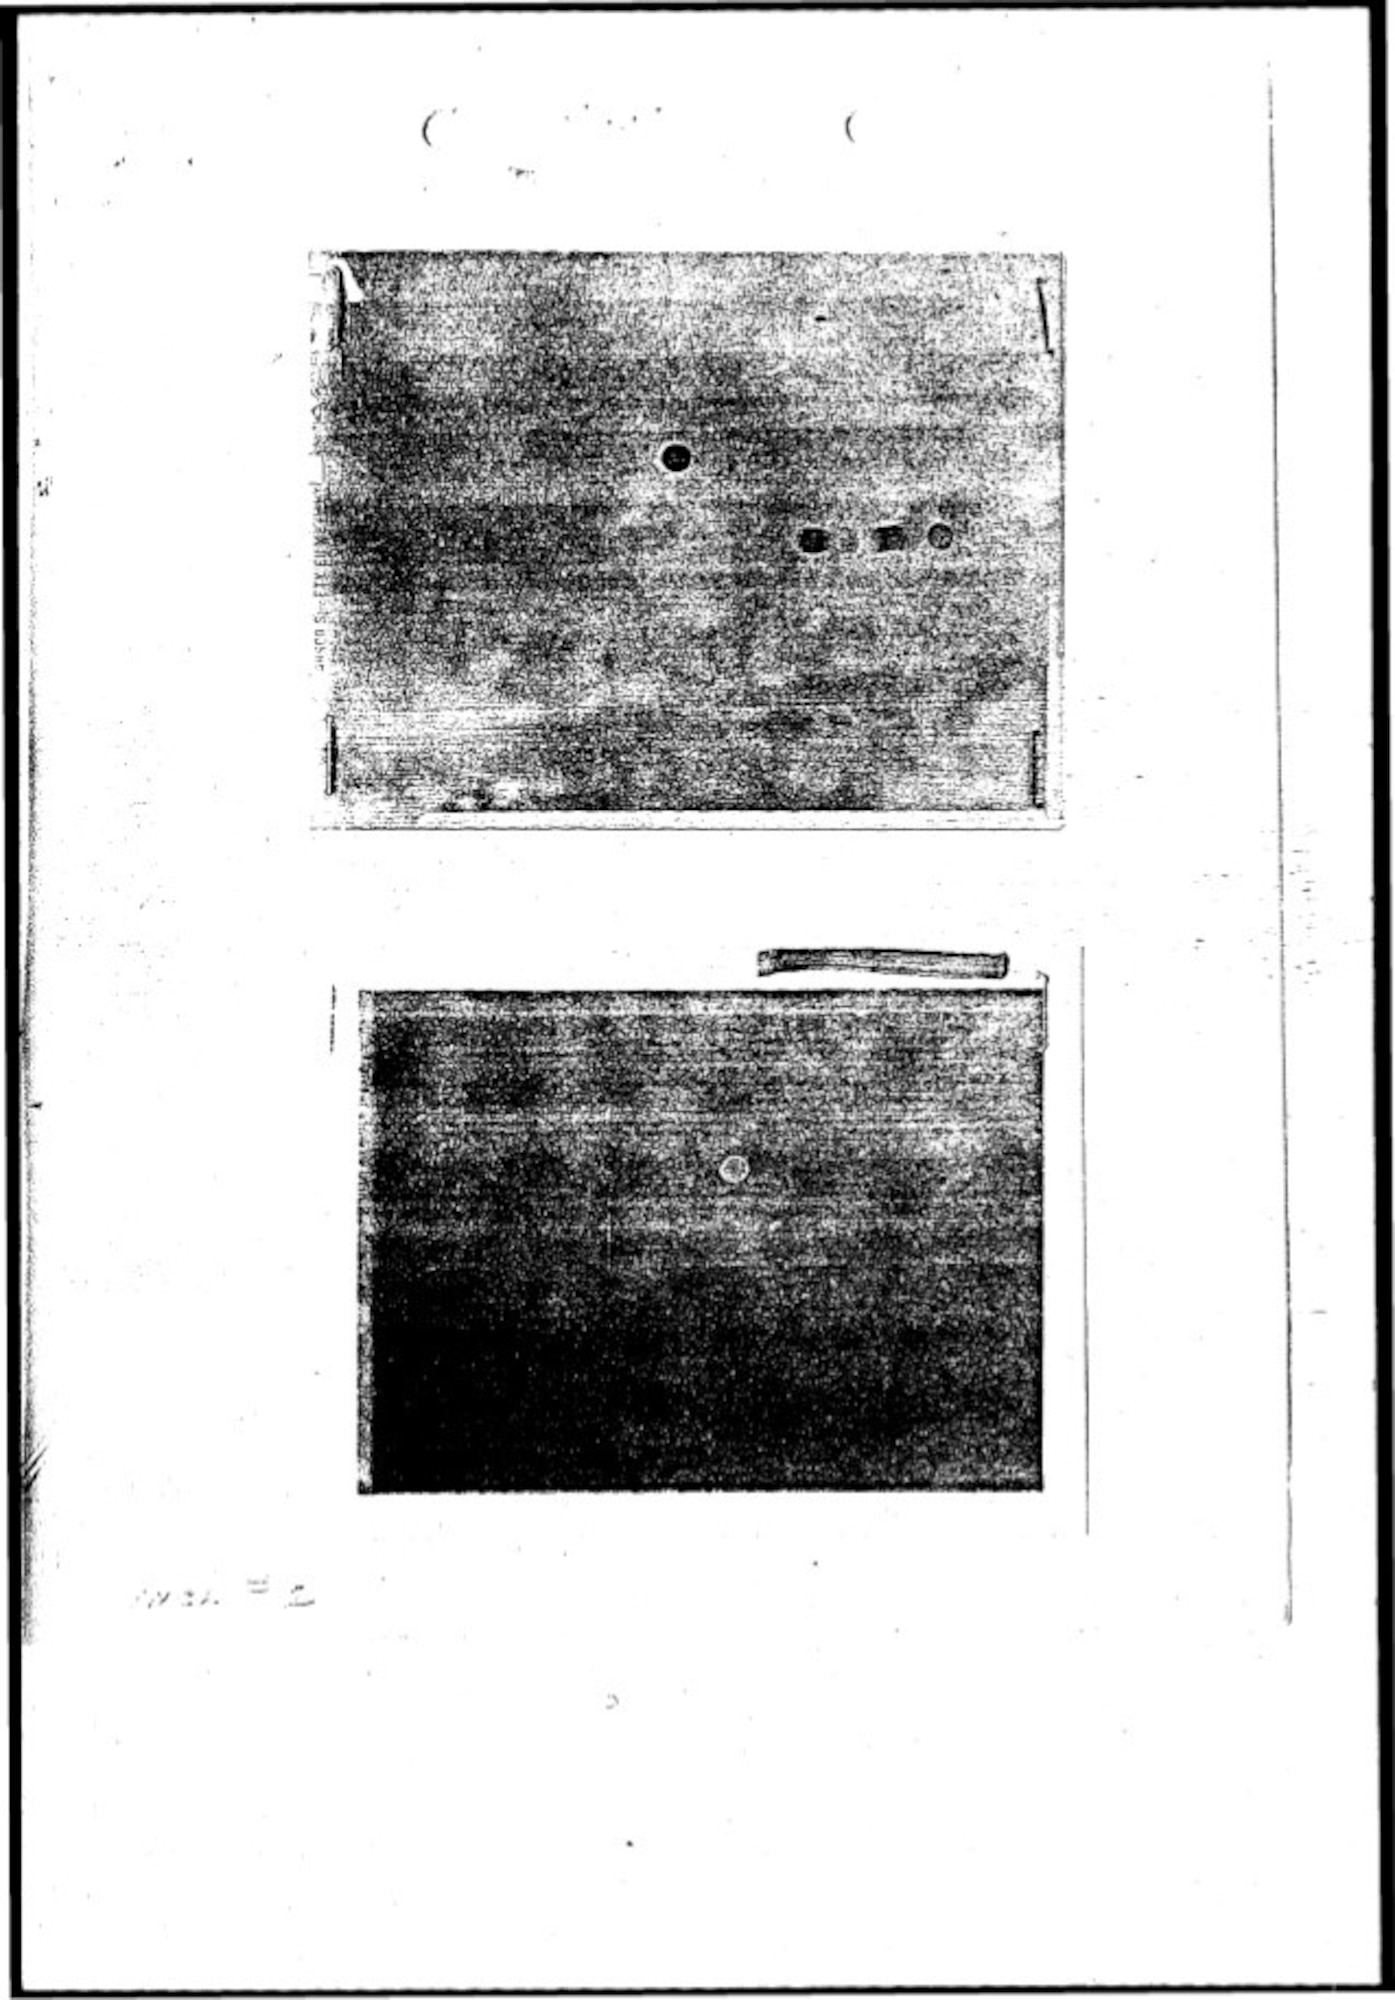 Shown are photographs taken in New Mexico by an Airman on Oct. 21, 1949, of an aerial phenomena and reported to OSI. (OSI District Files; 17th District: Kirkland Air Force Base, N.M.; OSI File Designation 24-185-17)